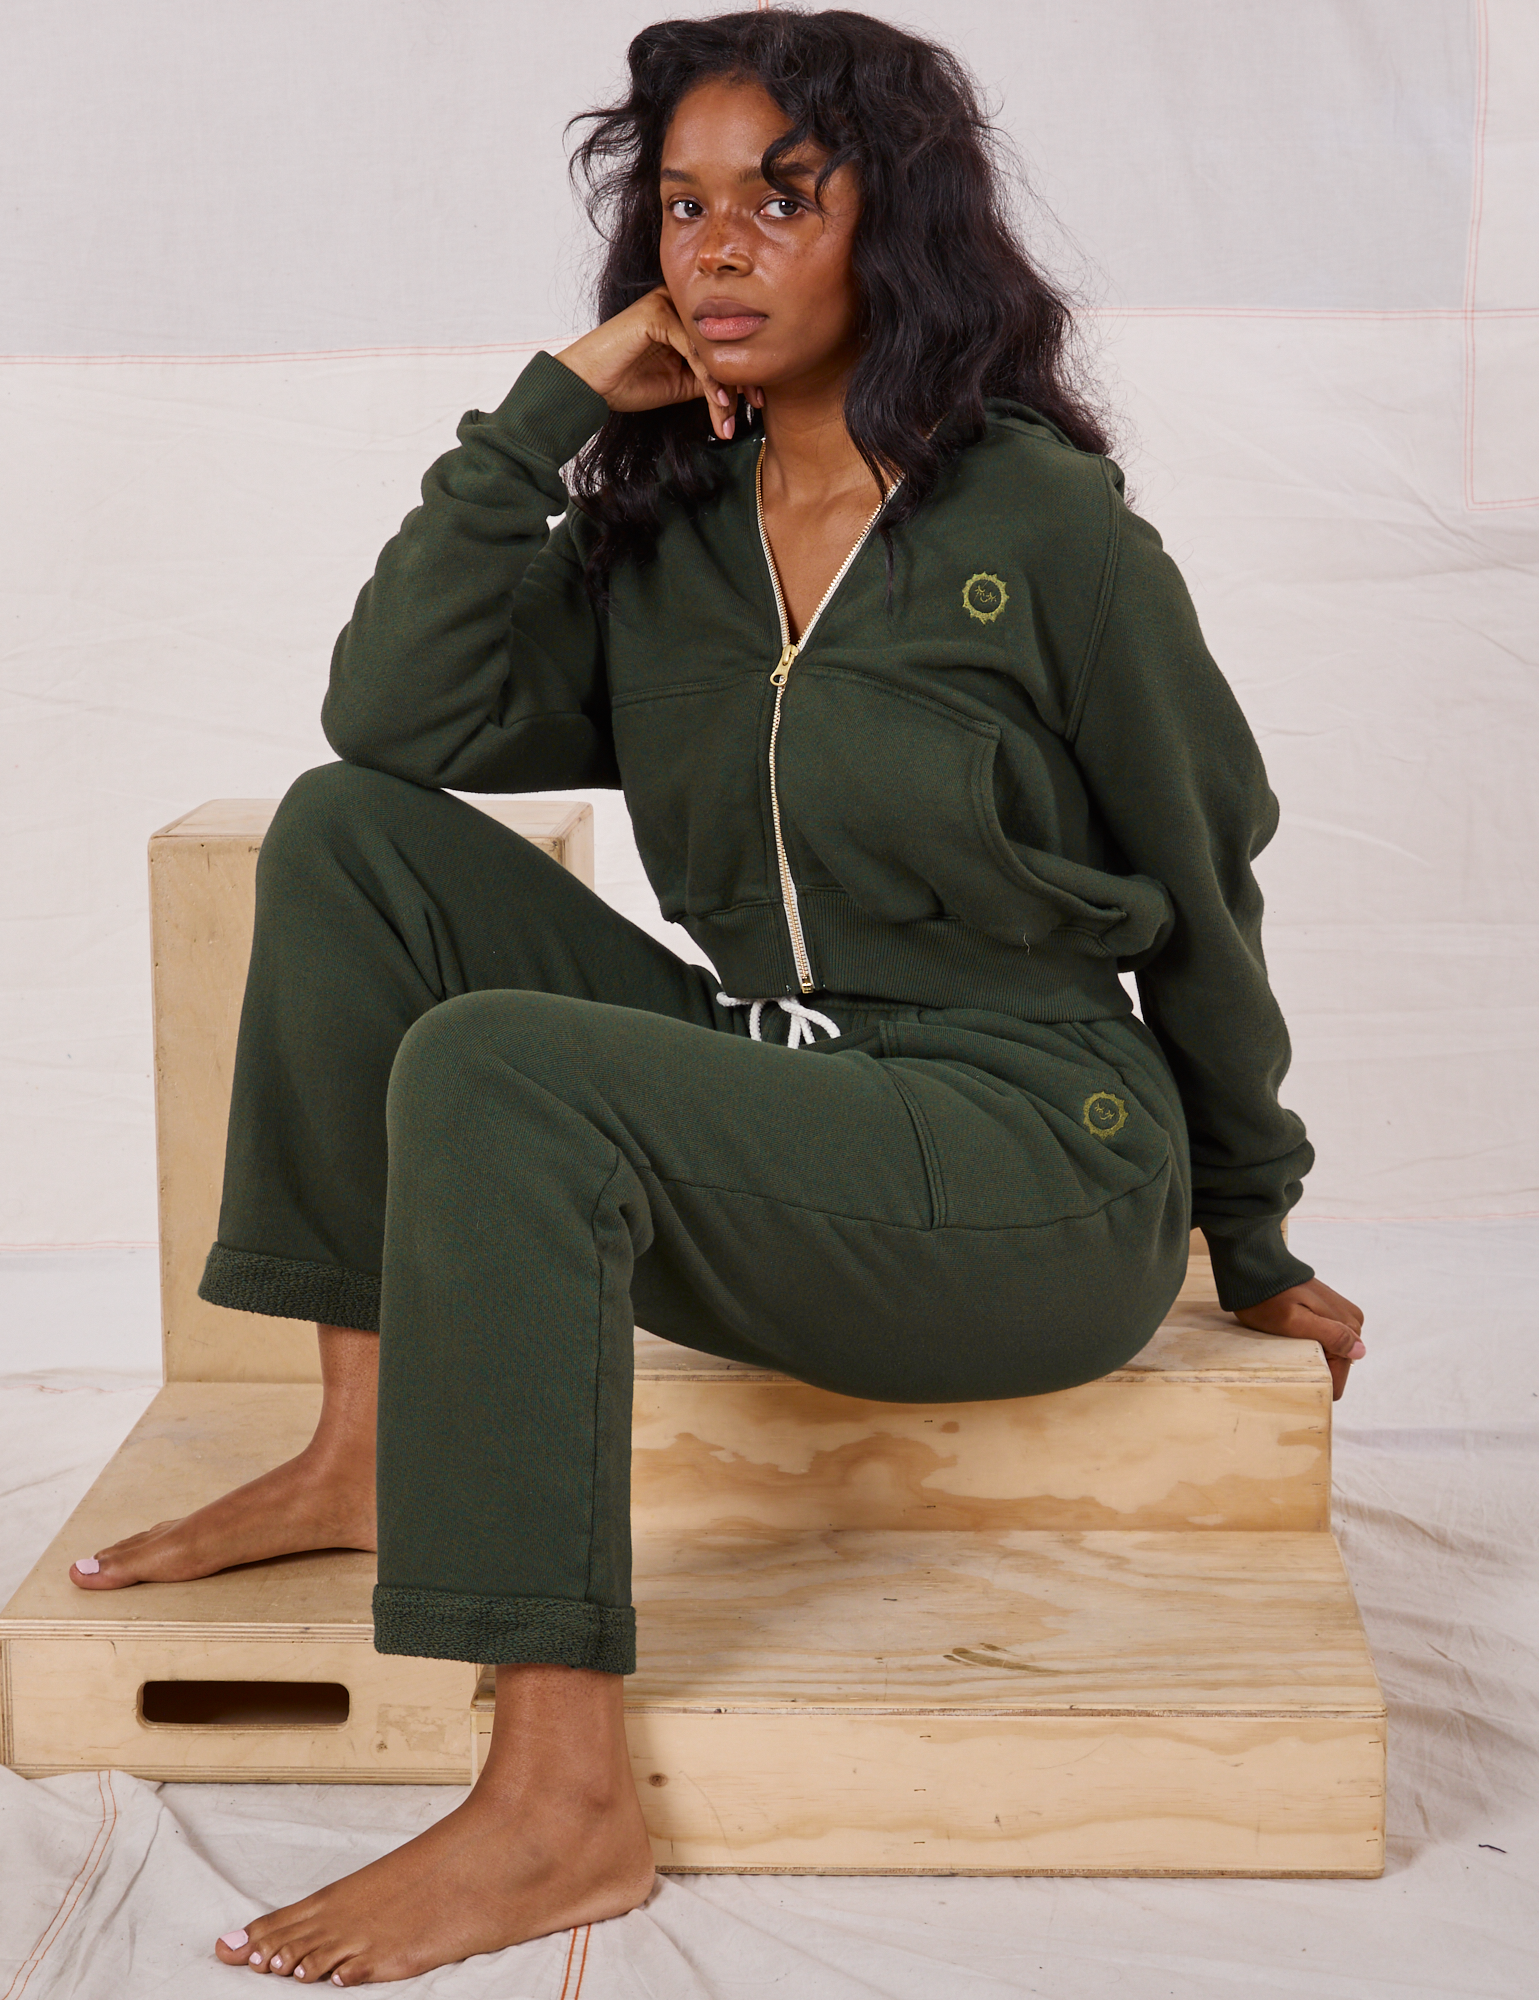 Kandia is wearing Rolled Cuff Sweat Pants in Swamp Green and matching Cropped Zip Hoodie